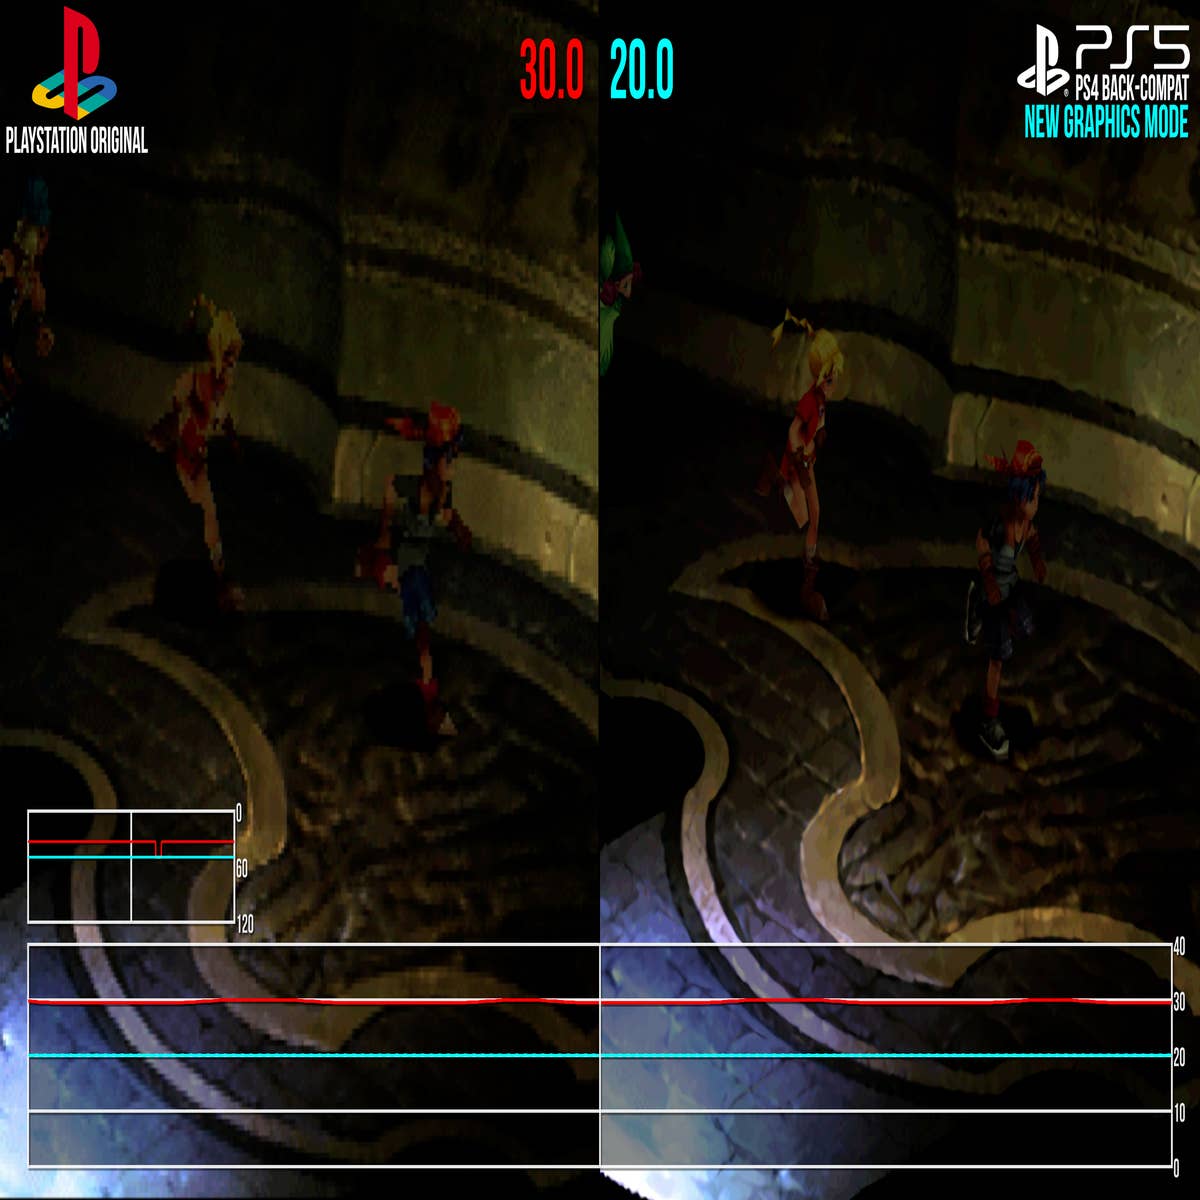 Chrono Cross Remaster Rumored To Be a PS5 Exclusive